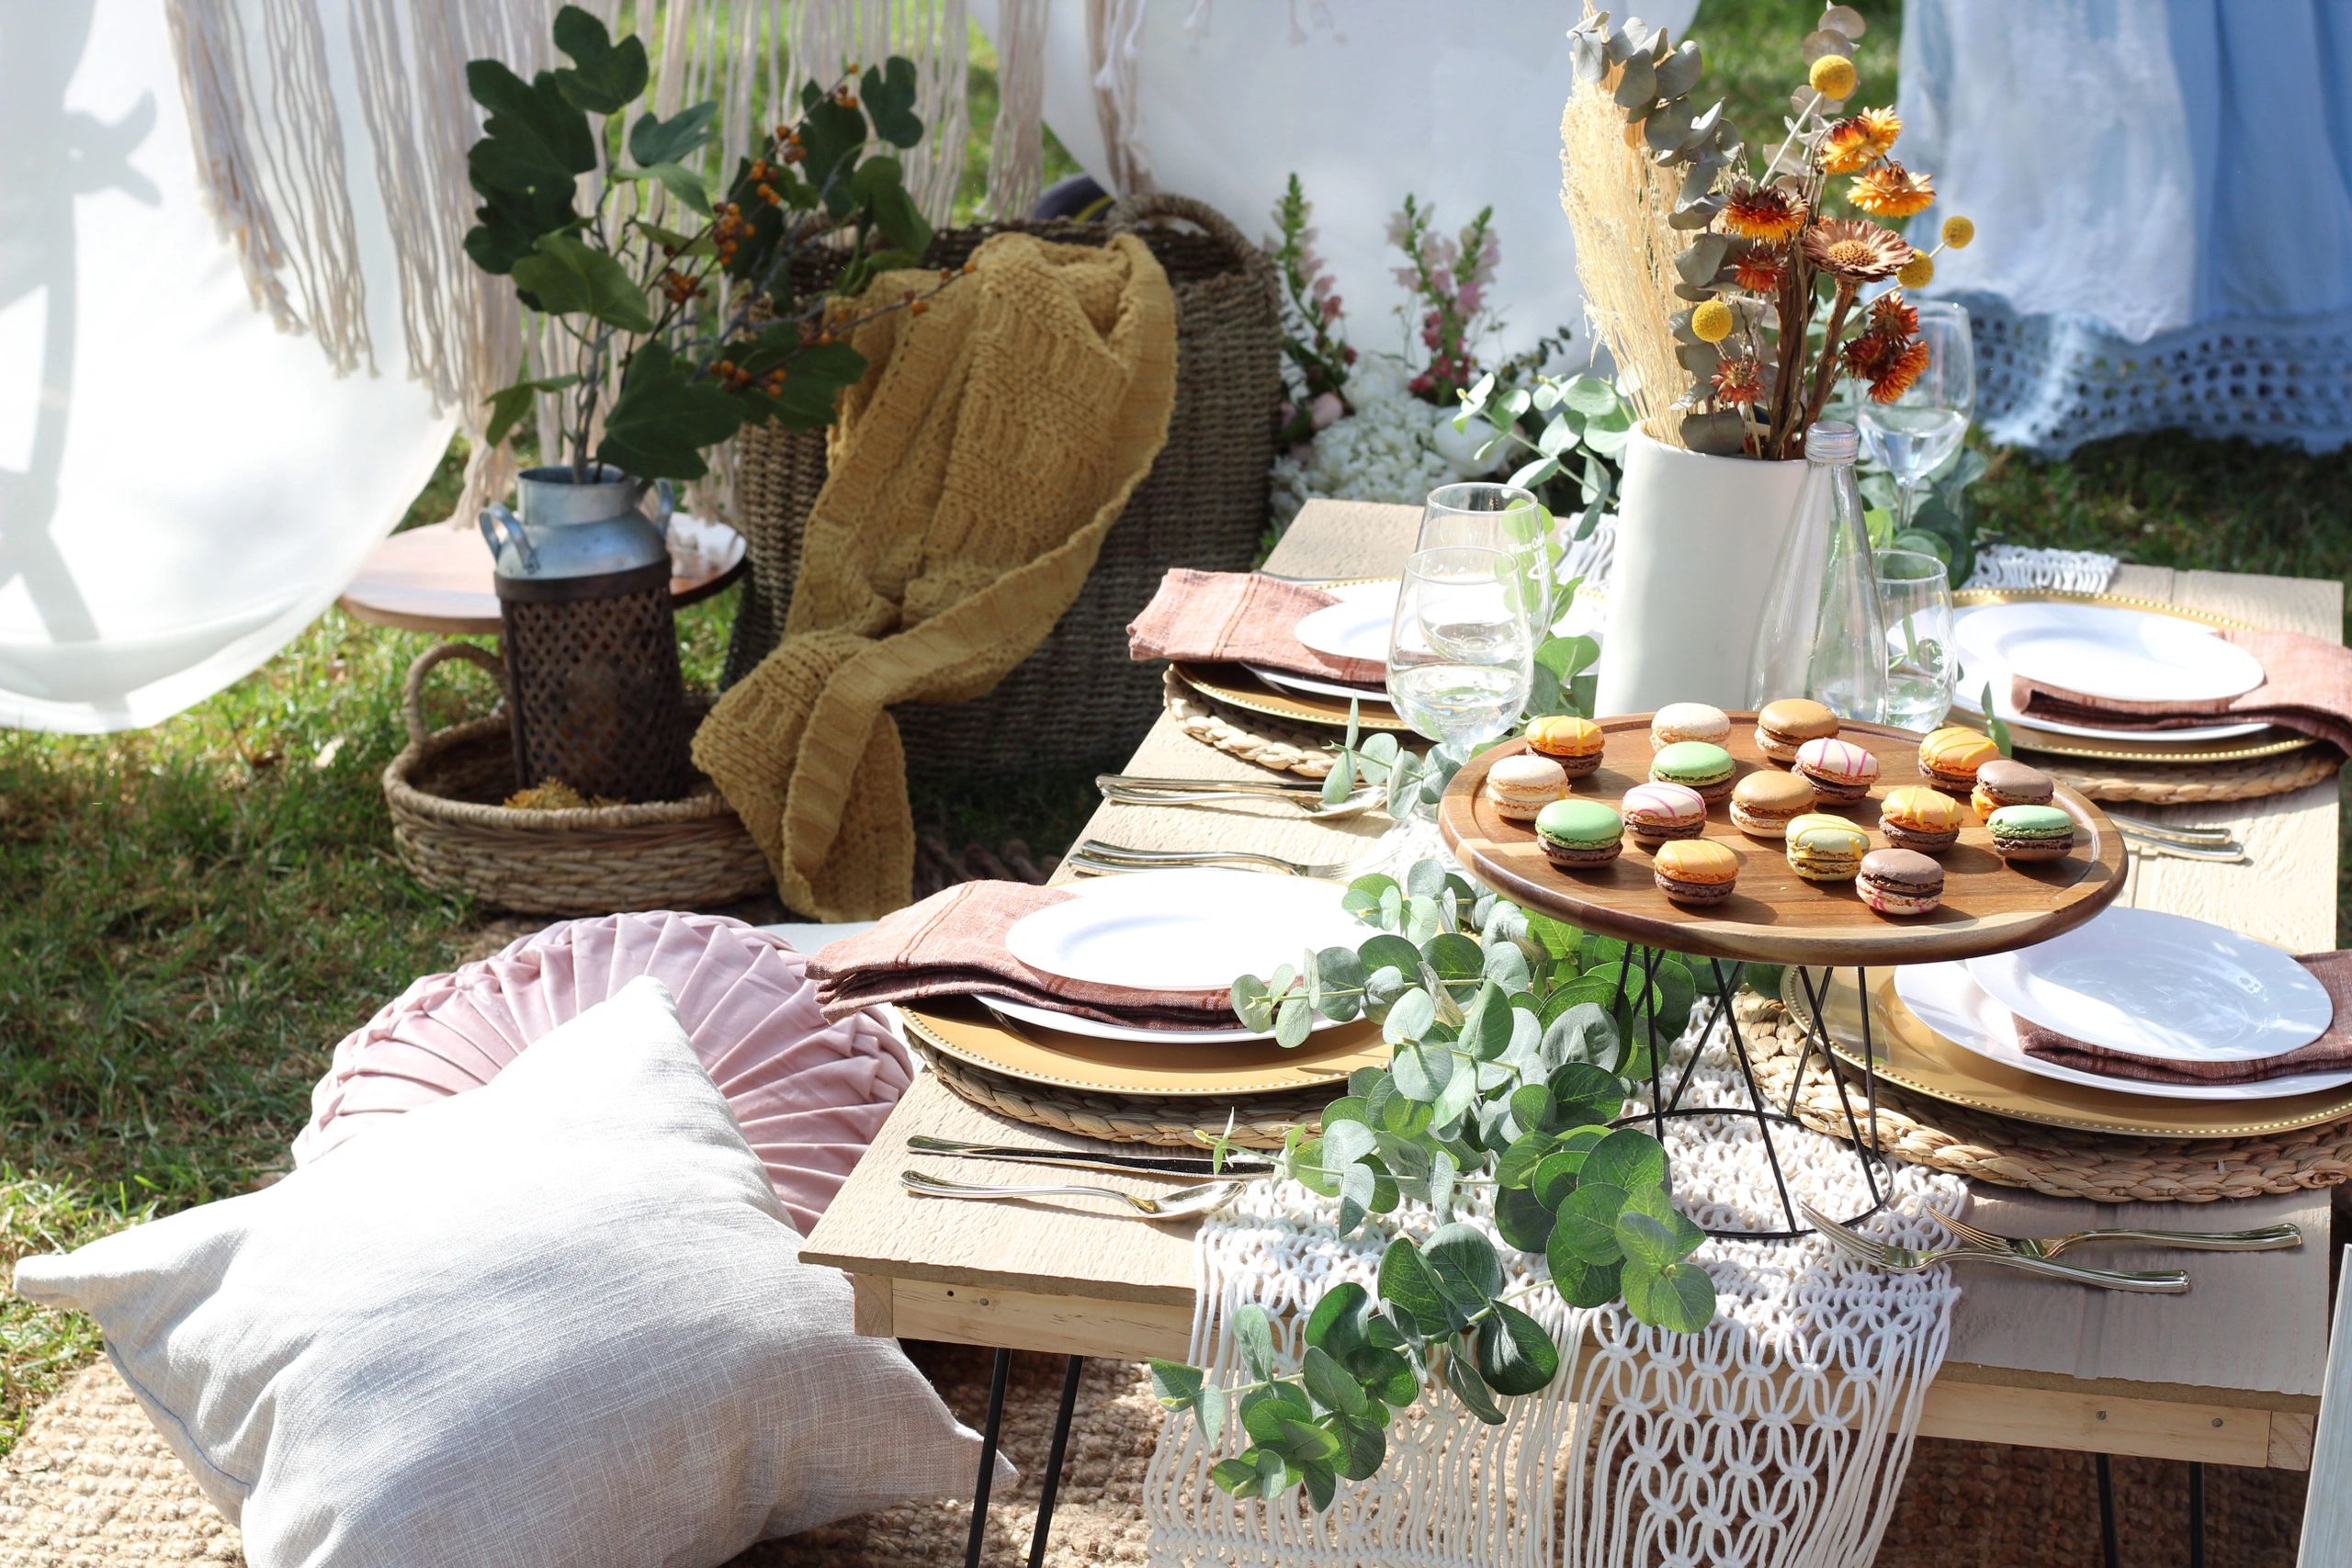 a surprise luxury pop up picnic set up in a park in cerritos, orange county with weaved baskets